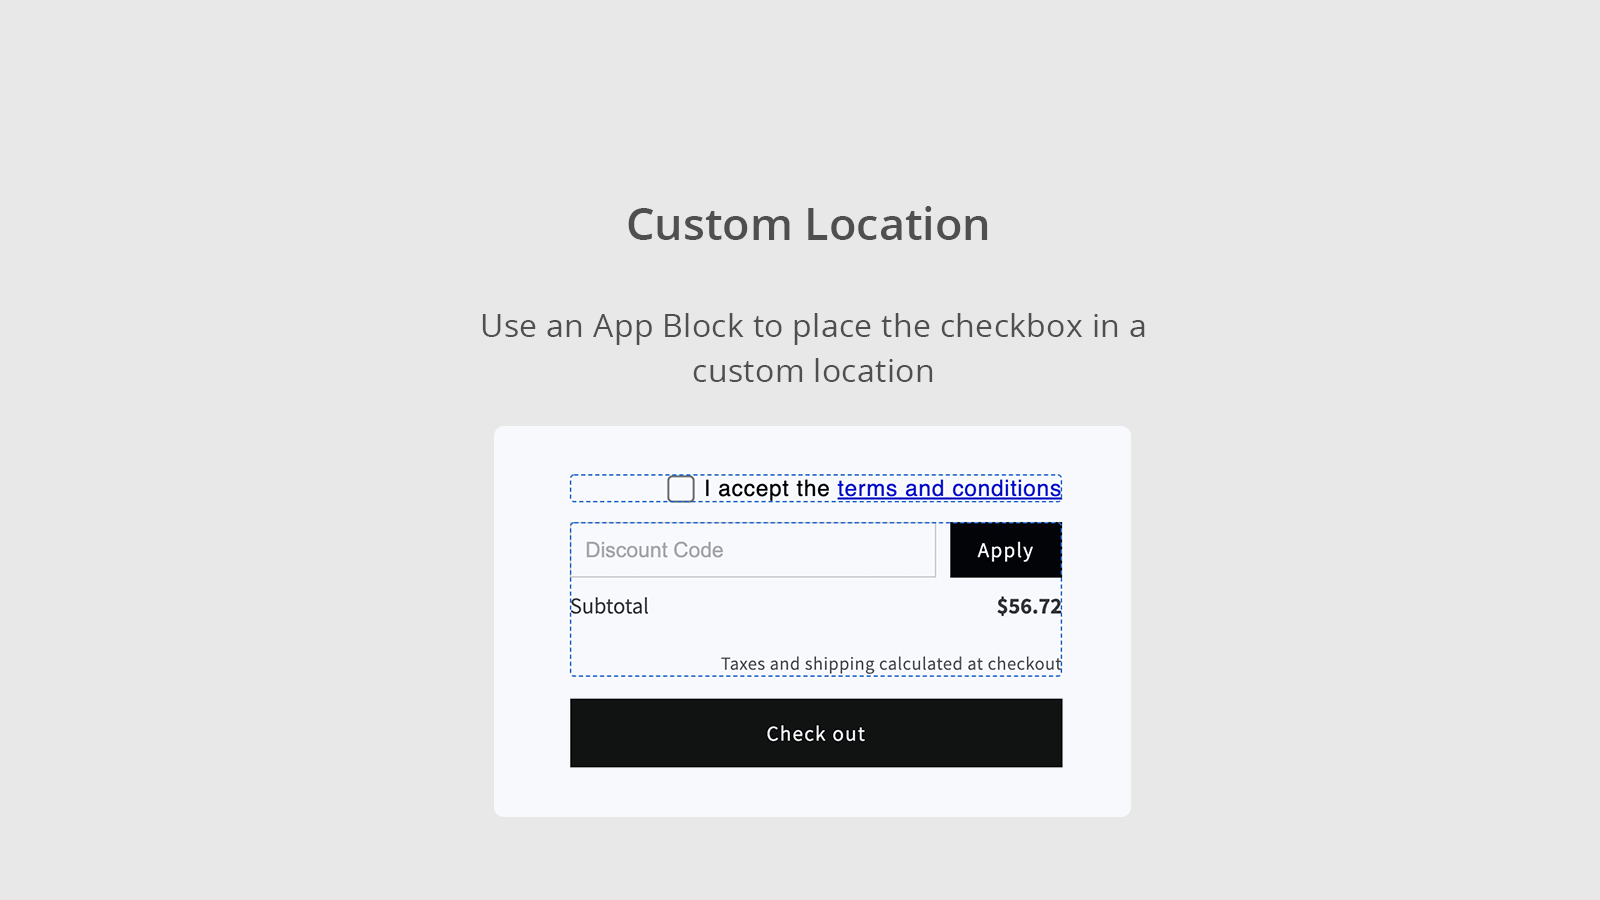 Terms and conditions checkbox, create custom message